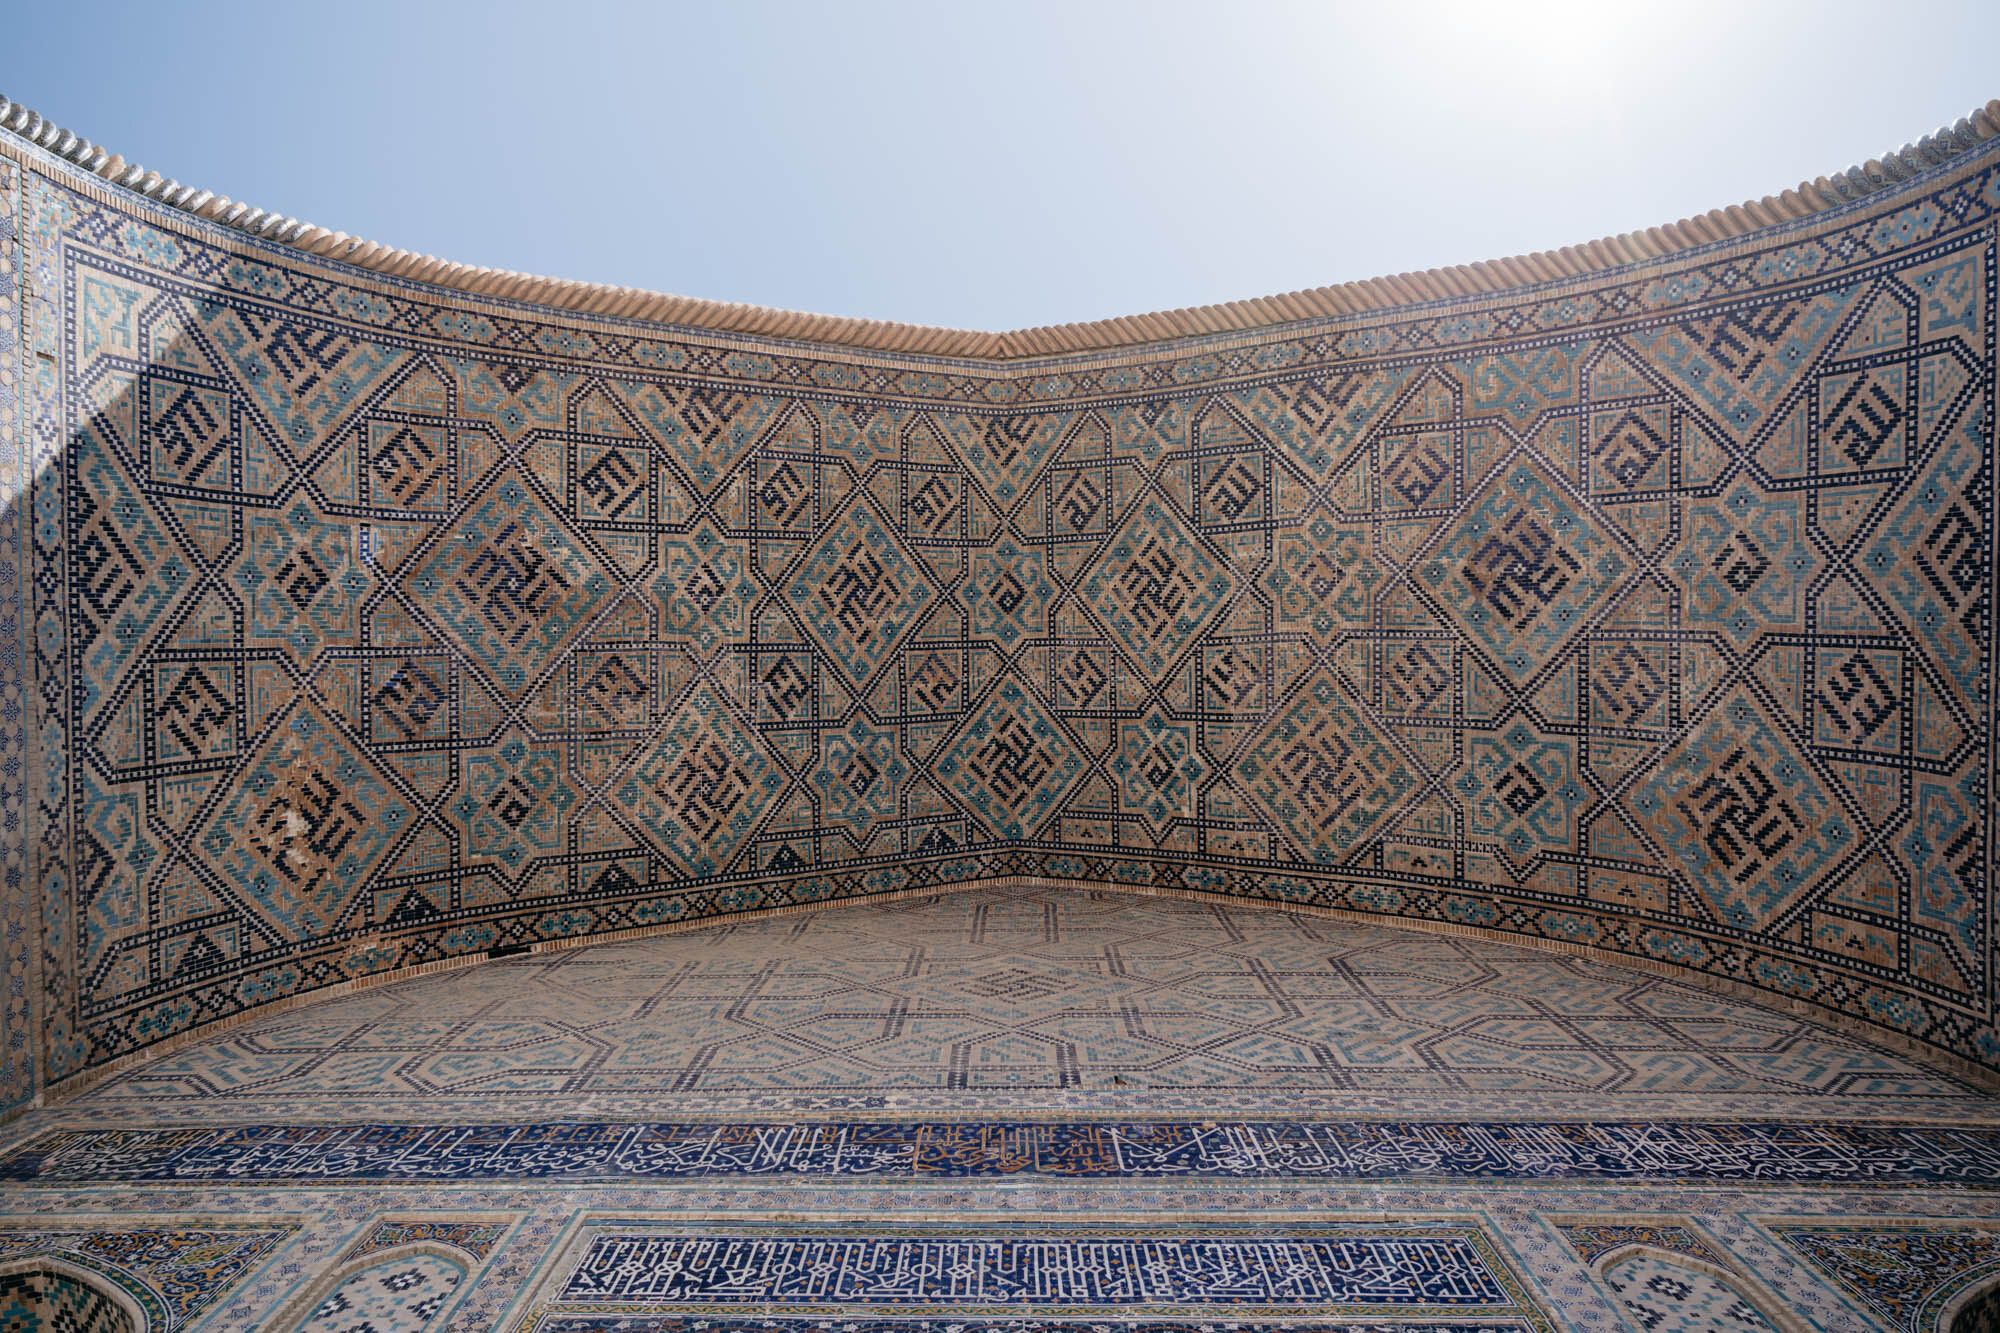  Ceiling details from the Sher-Dor Madrasah, Samarkand 